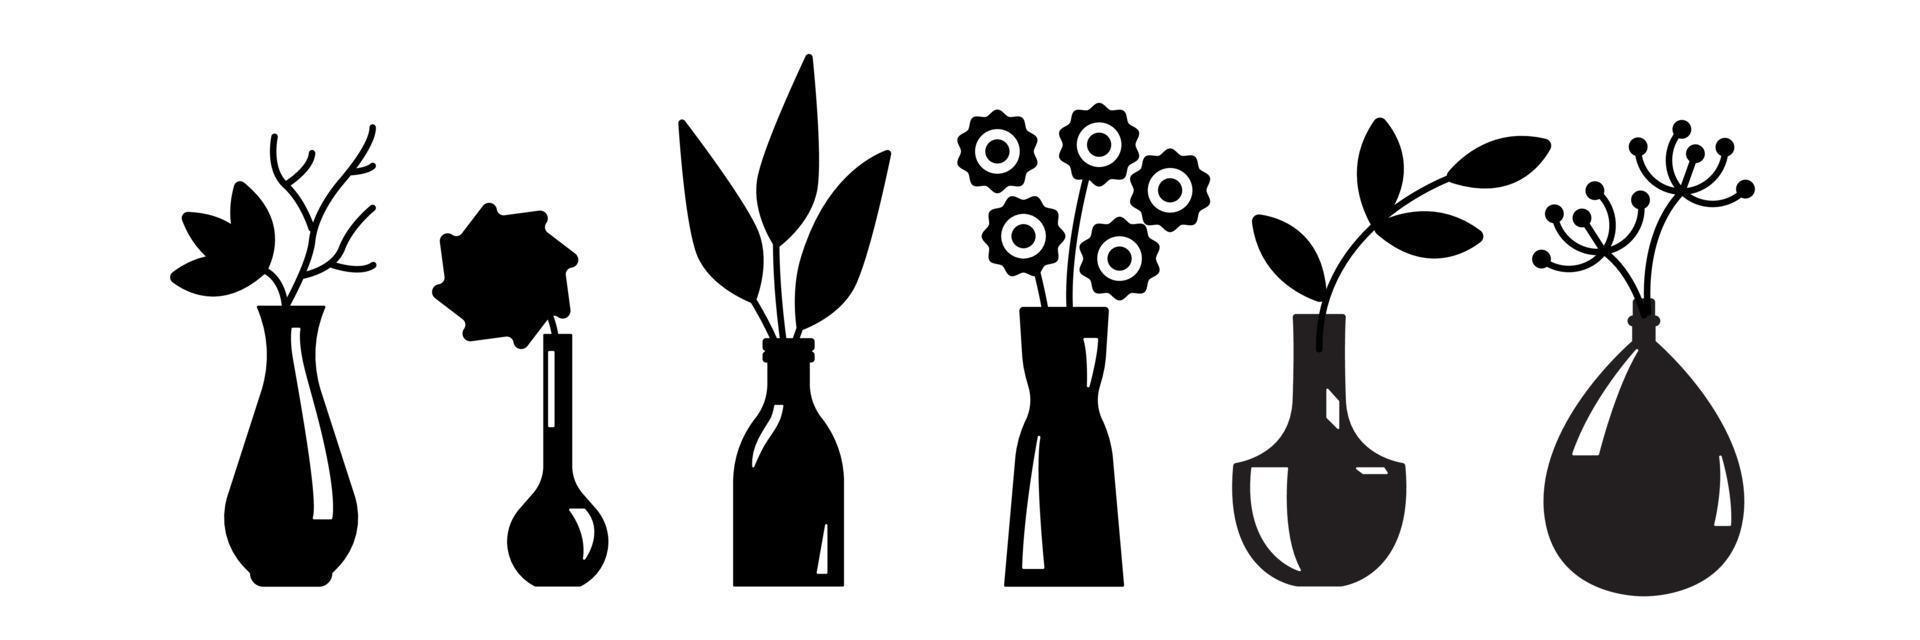 Flowers in the vase silhouette. Simply shapes. Element of interior, decoration for design. Vector illustration on white back ground isolated